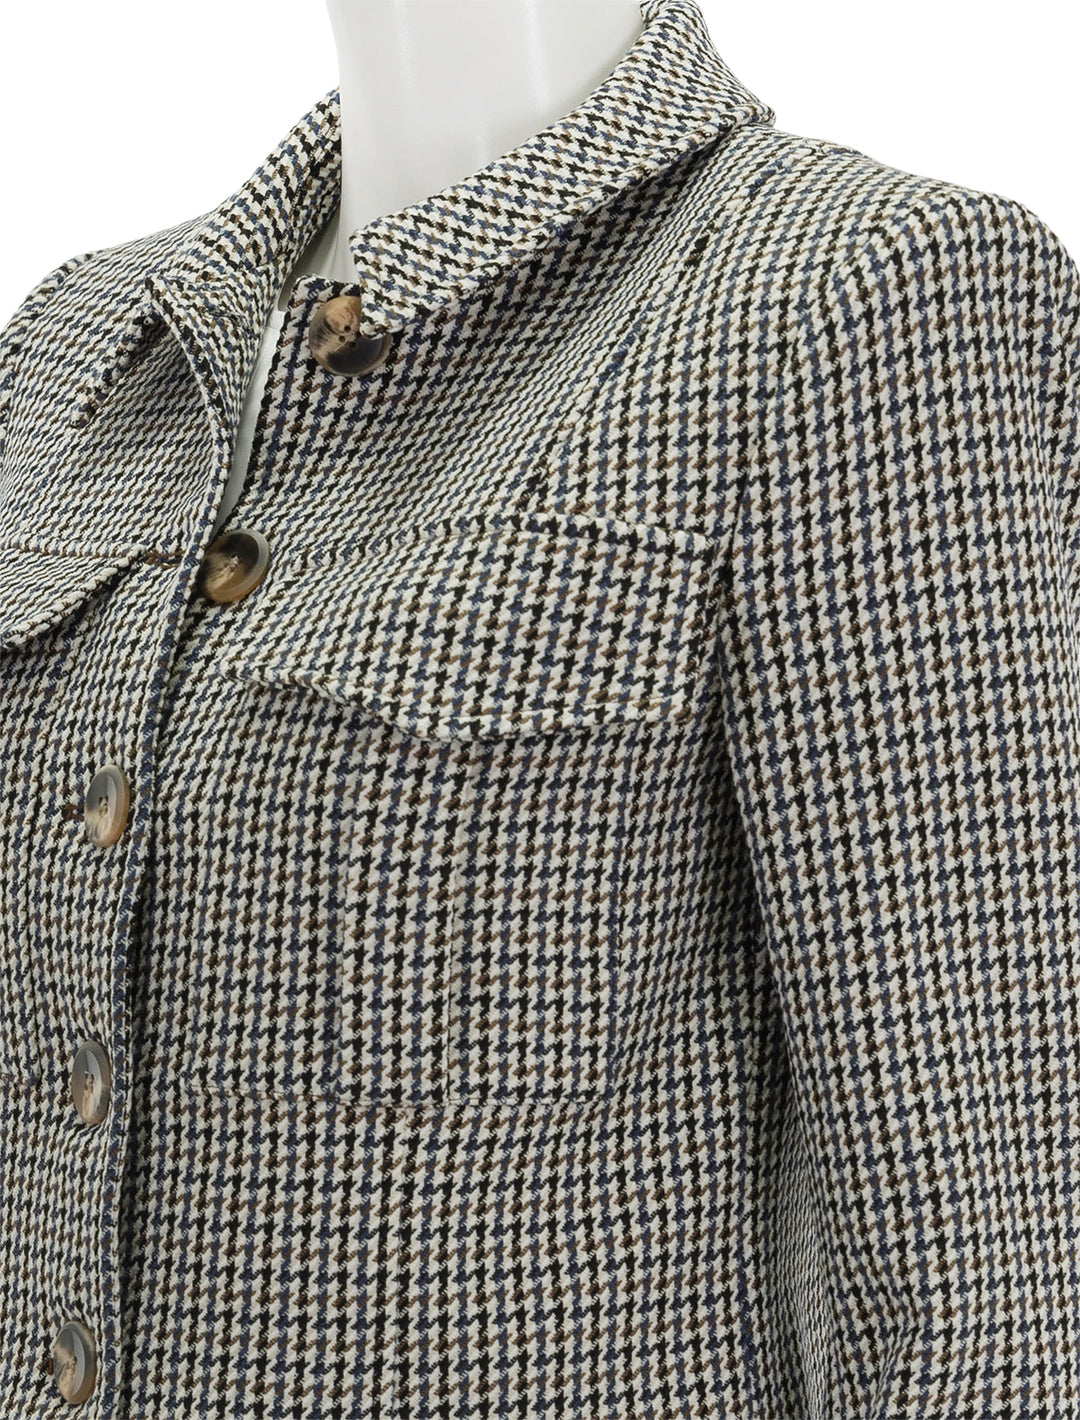 Close-up view of Veronica Beard's fulham jacket in multi check.